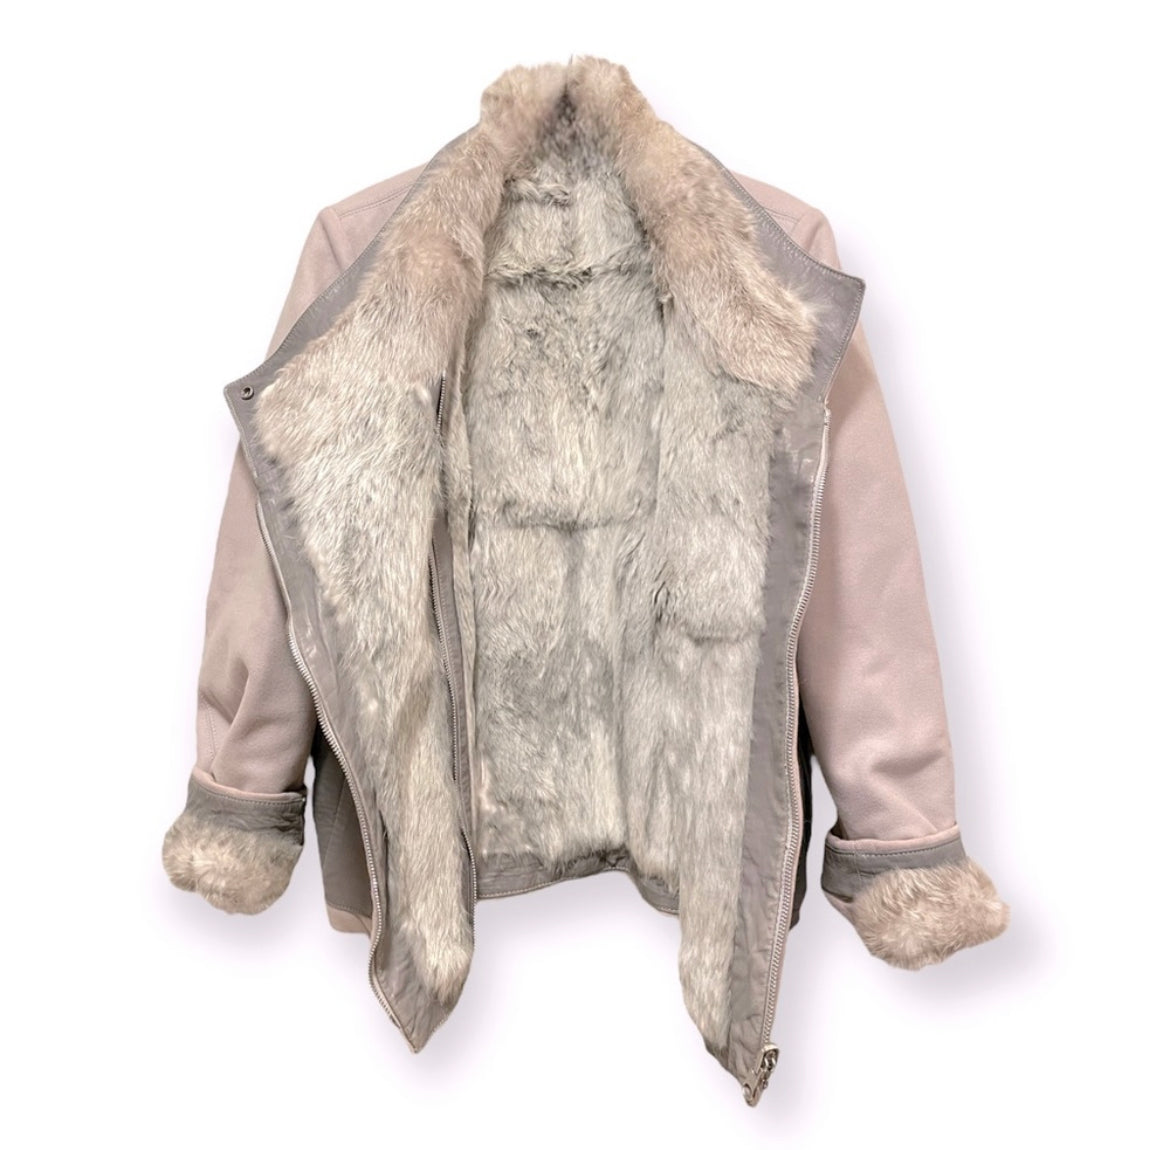 HELMUT LANG Reversible Wool & Fur Jacket with Lamb leather Accents |Size: Small|